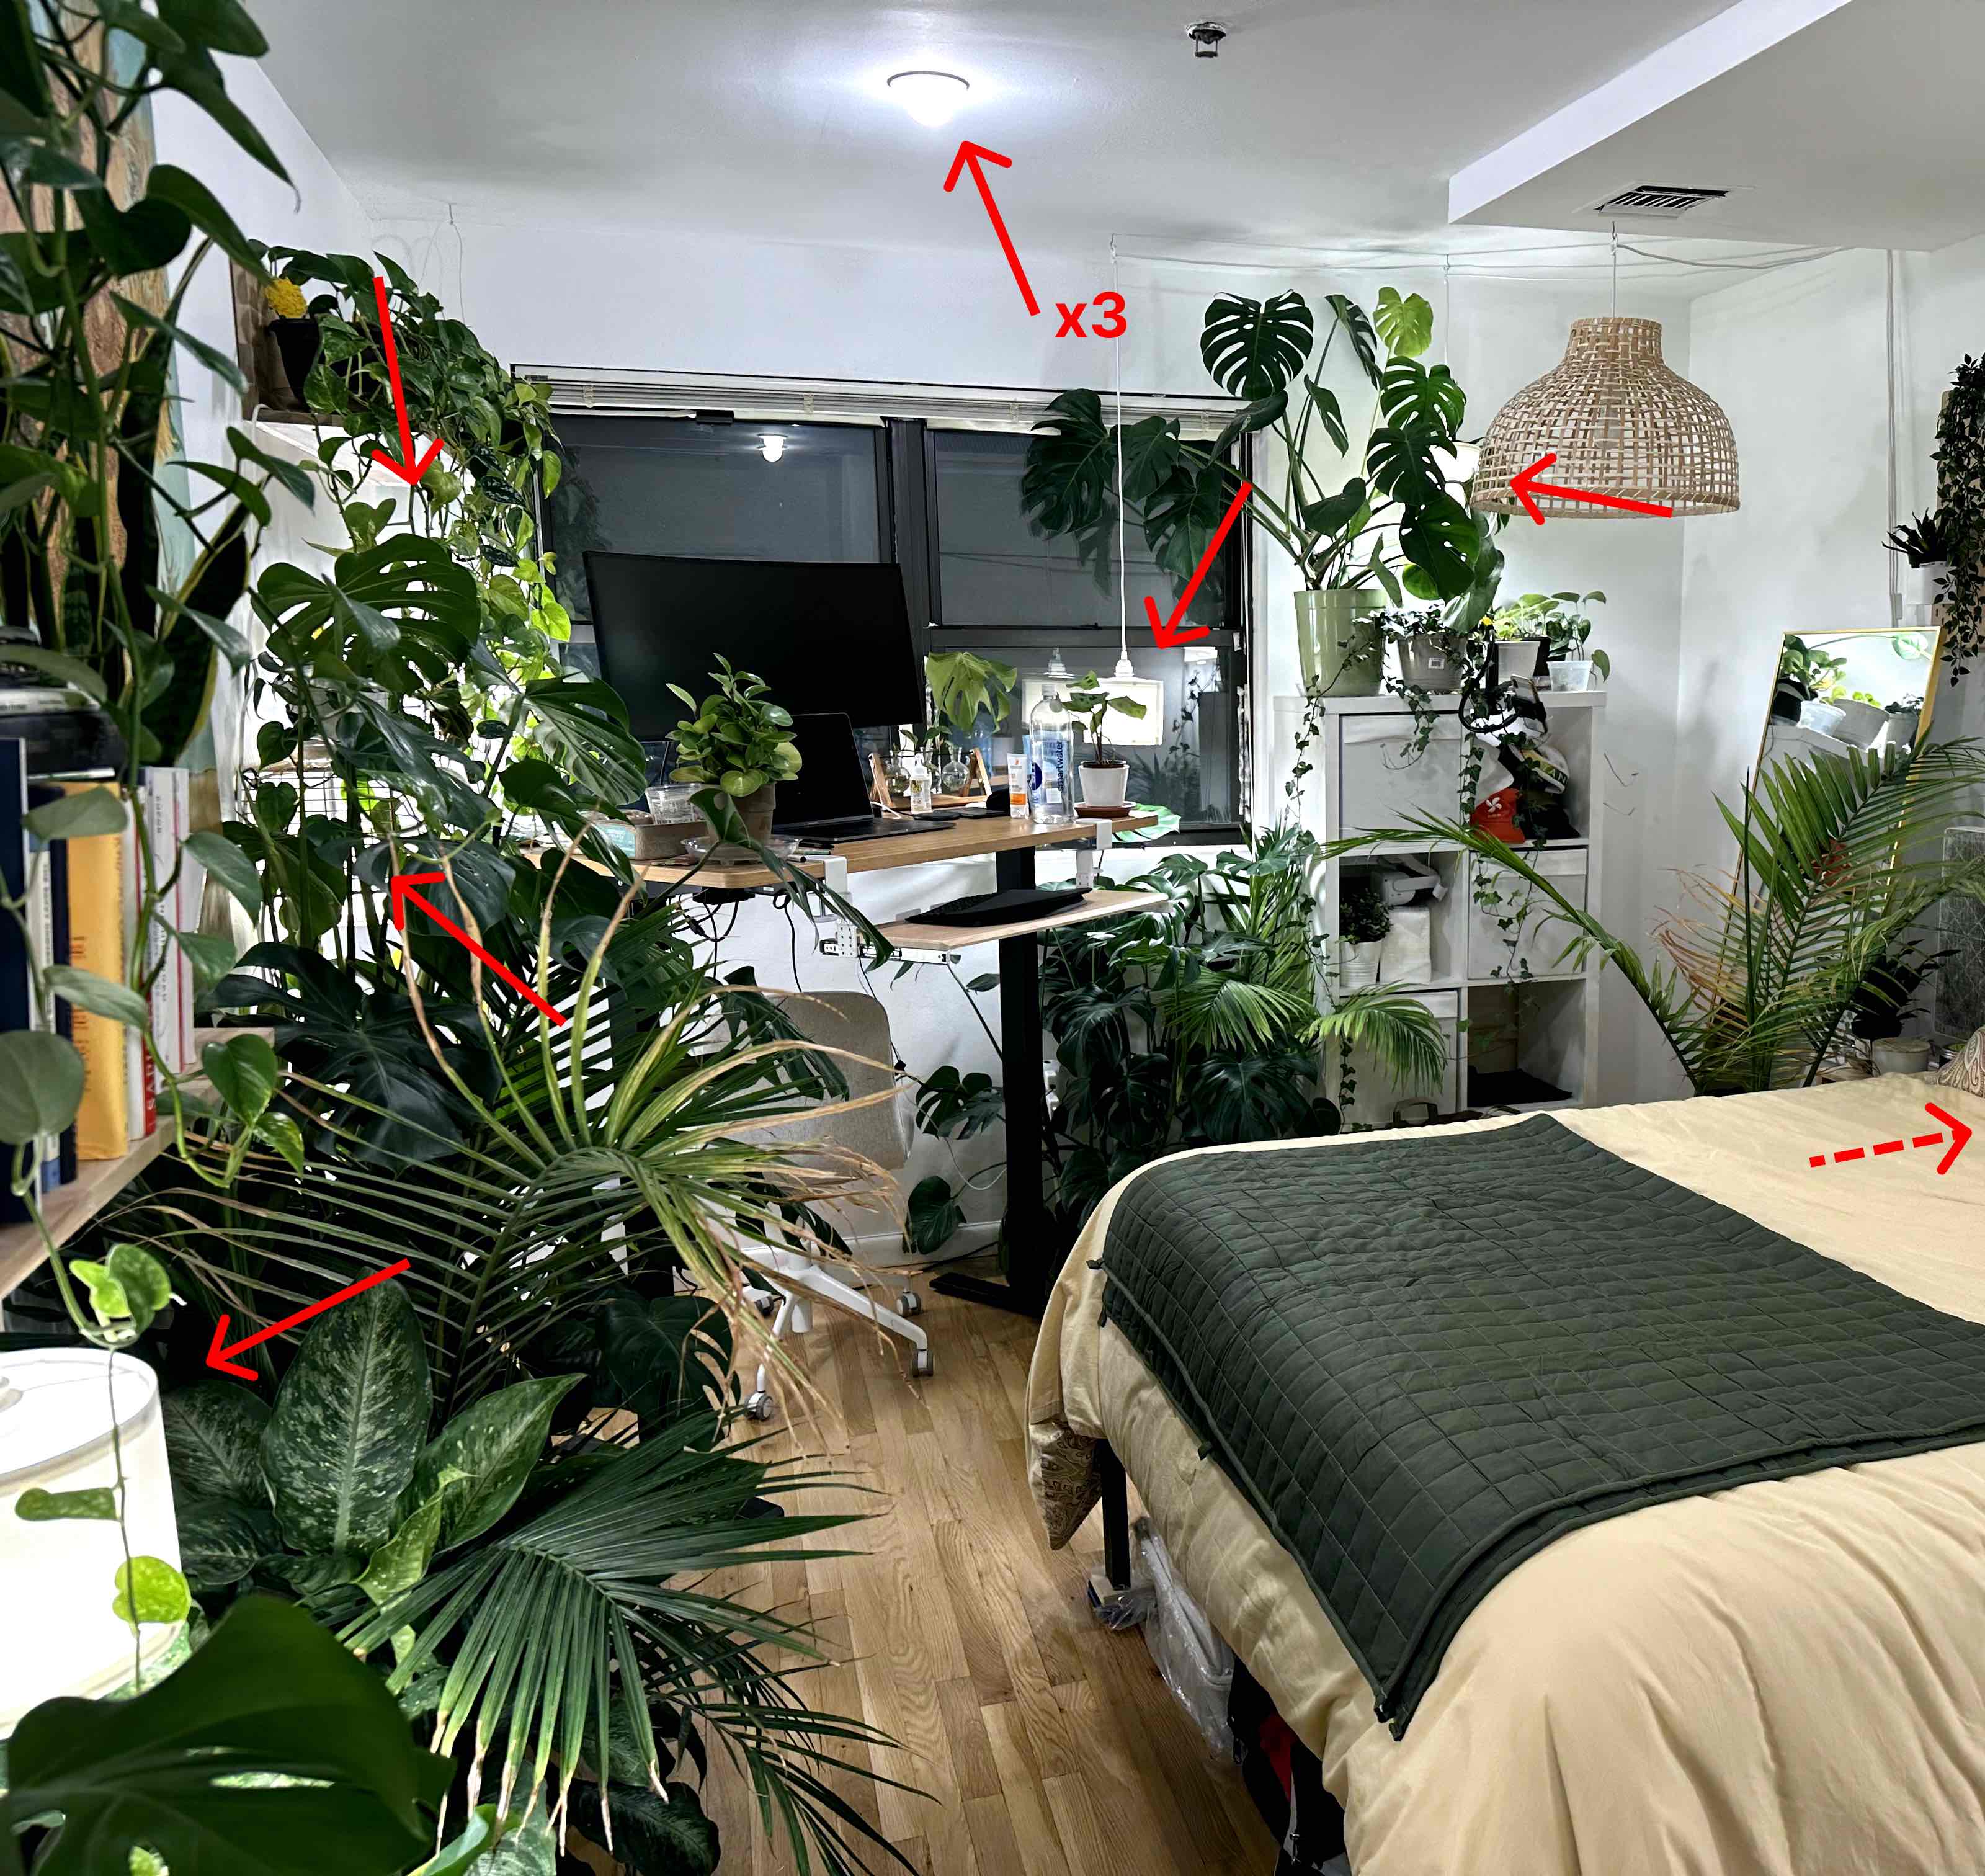 Room with 30 plants strewn about. Red arrows point to 7 light bulbs spread across the room.